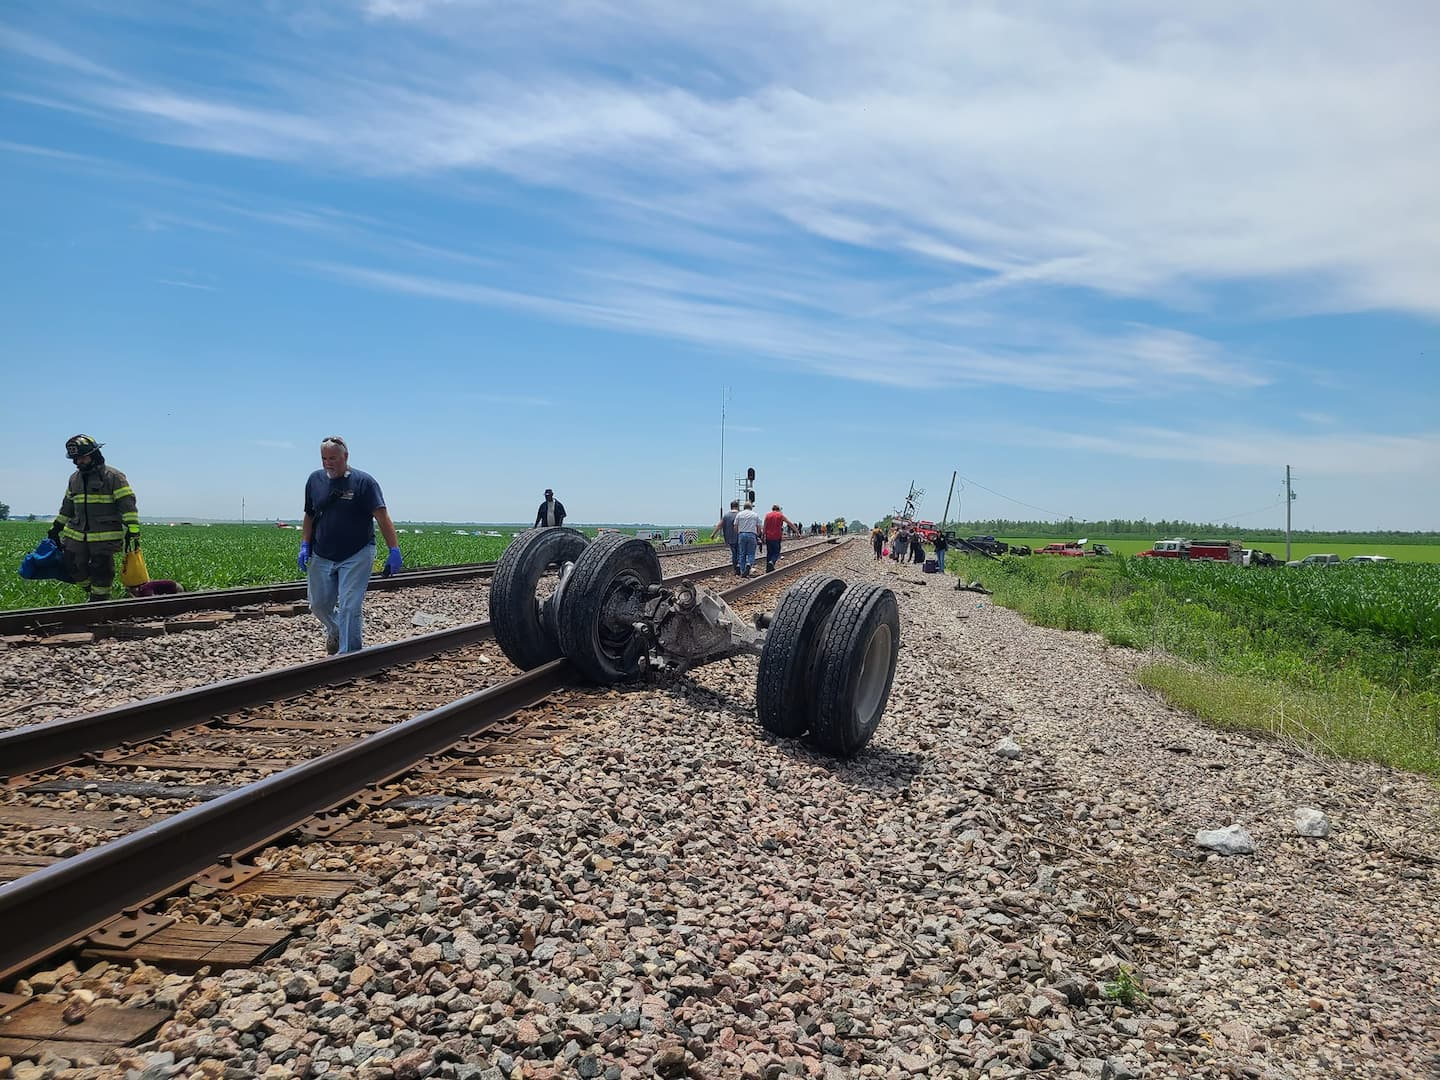 A train derails in the center of the United States, “injuries”